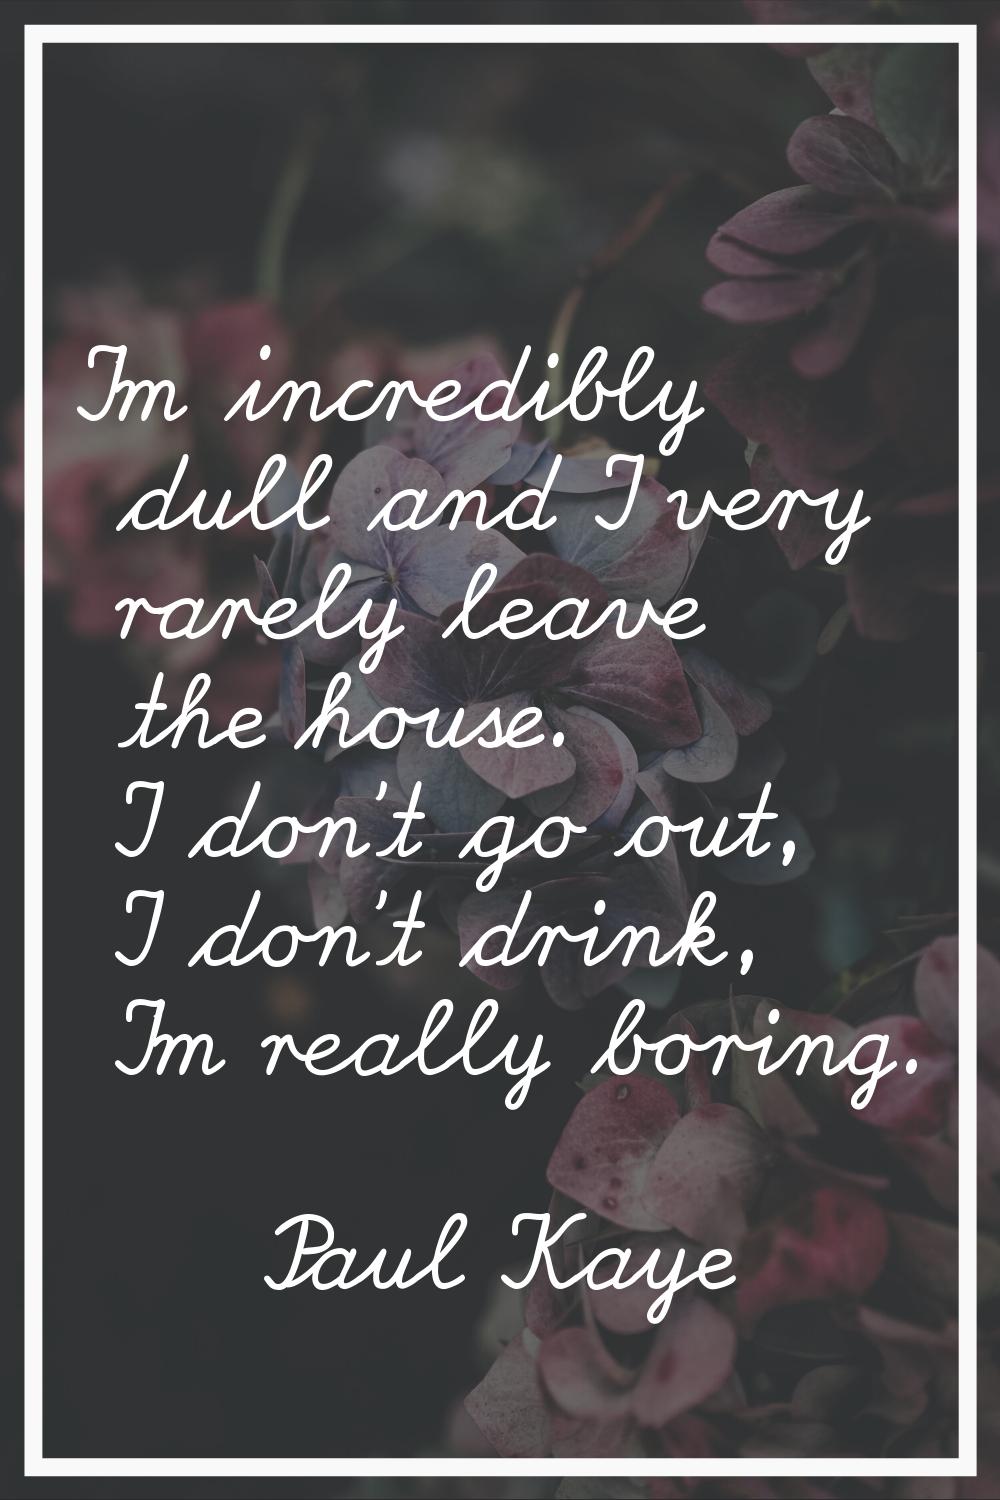 I'm incredibly dull and I very rarely leave the house. I don't go out, I don't drink, I'm really bo